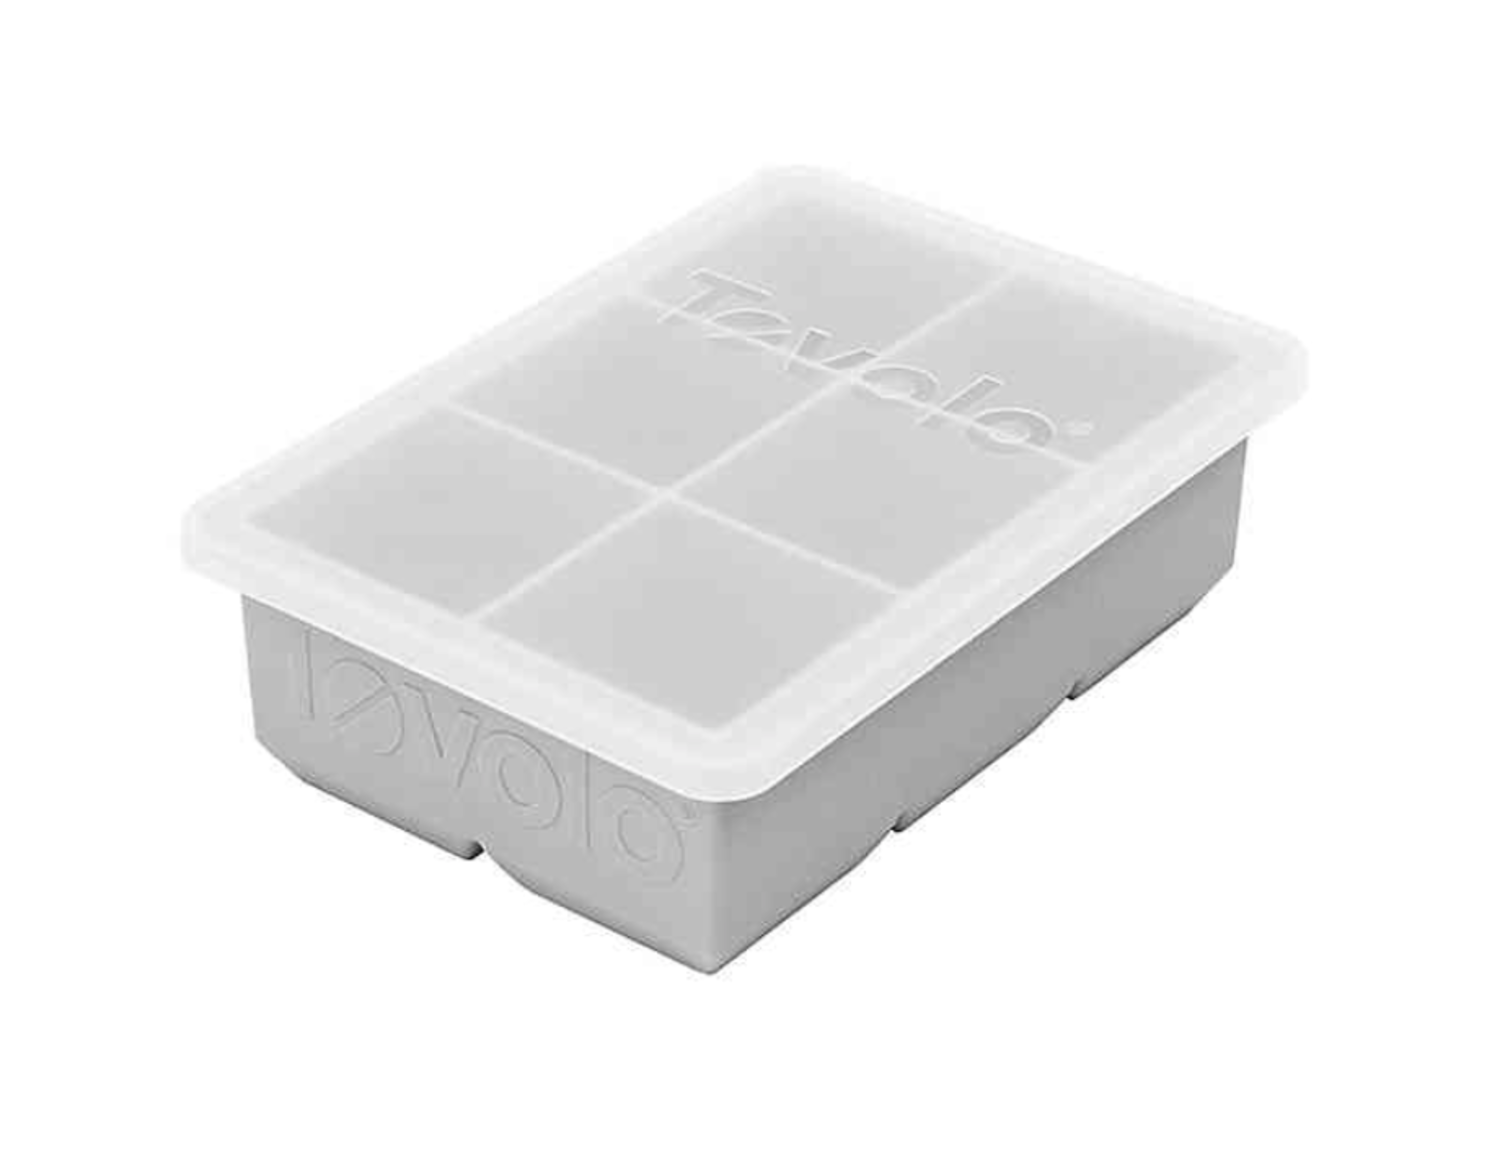 https://cdn.shoplightspeed.com/shops/633447/files/22537613/1500x4000x3/tovolo-oyster-grey-king-ice-cube-tray-with-lid.jpg